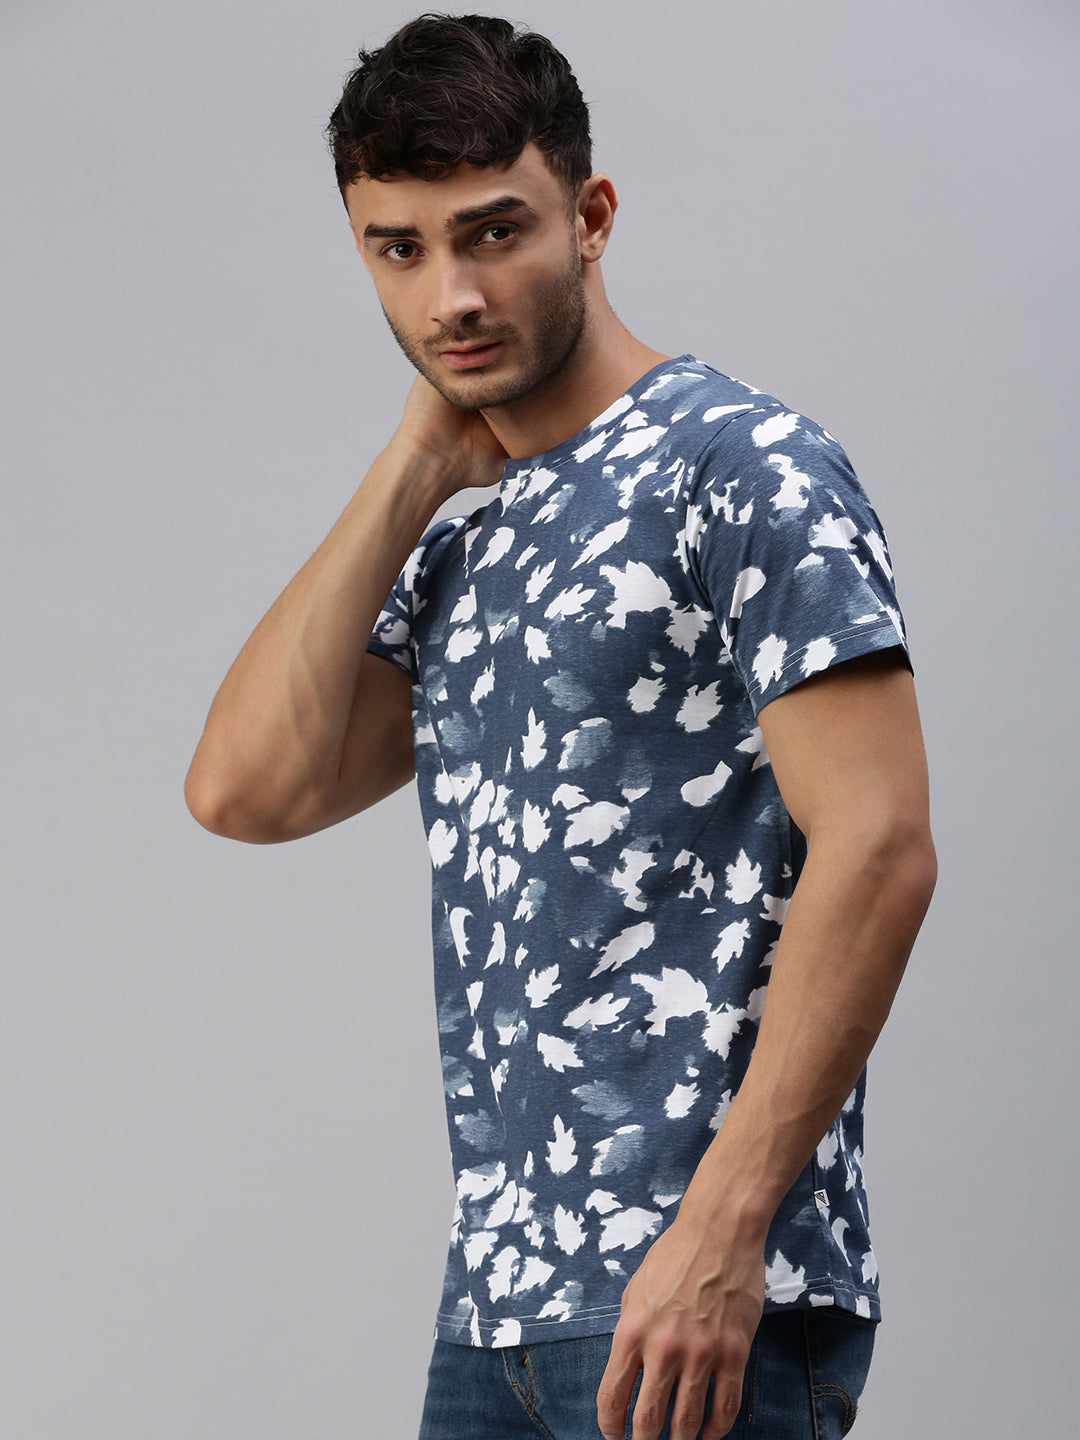 Graphic Printed Round Neck Casual T-Shirt with Pocket Navy GT24-Side view